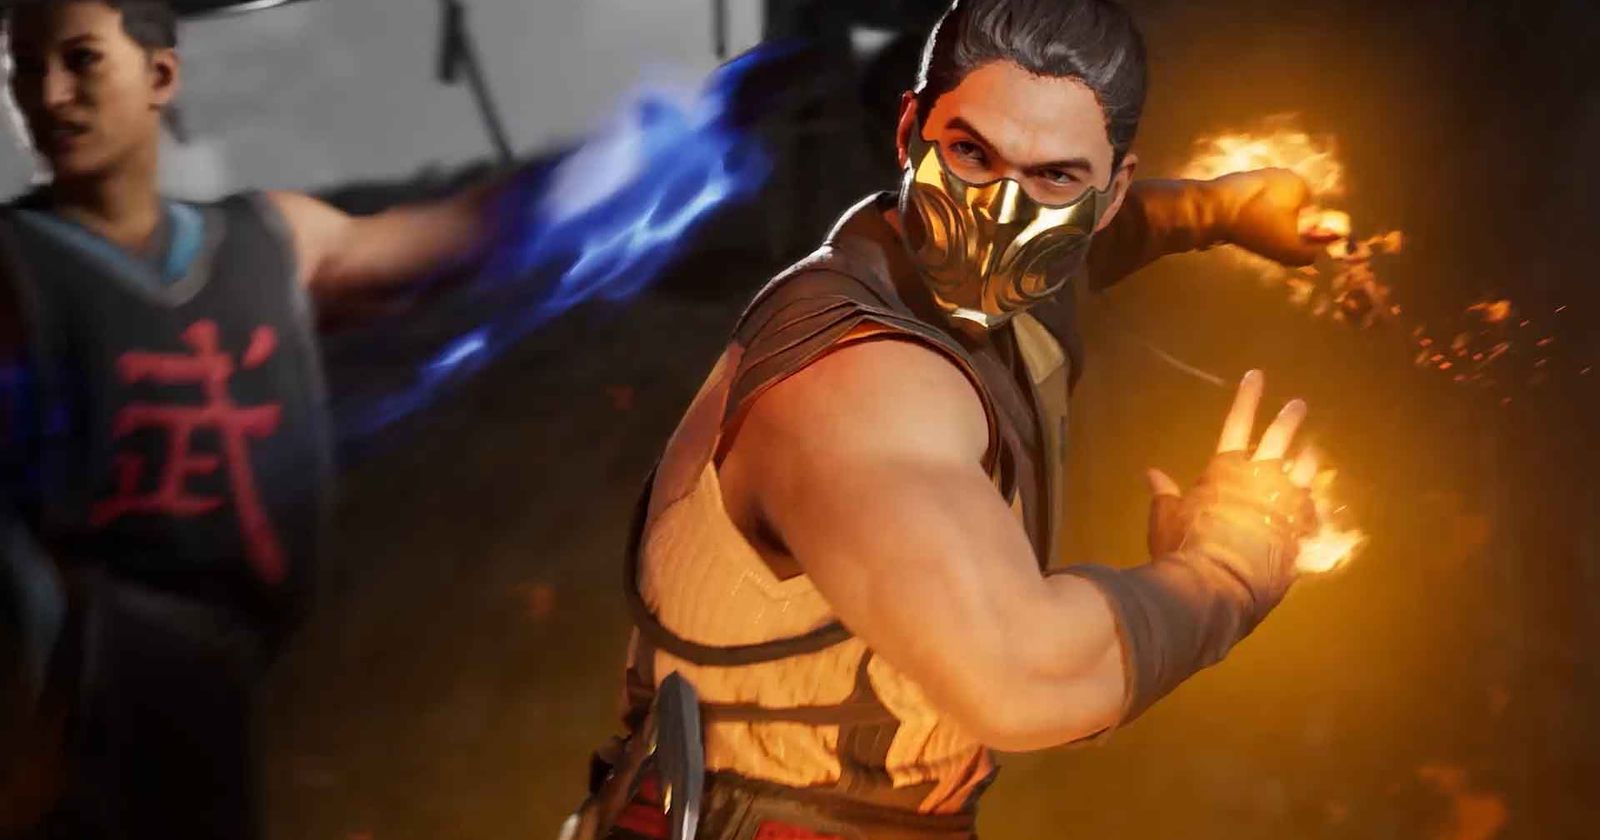 Check out Sub-Zero's Mortal Kombat 11 Fatality performed in Mortal